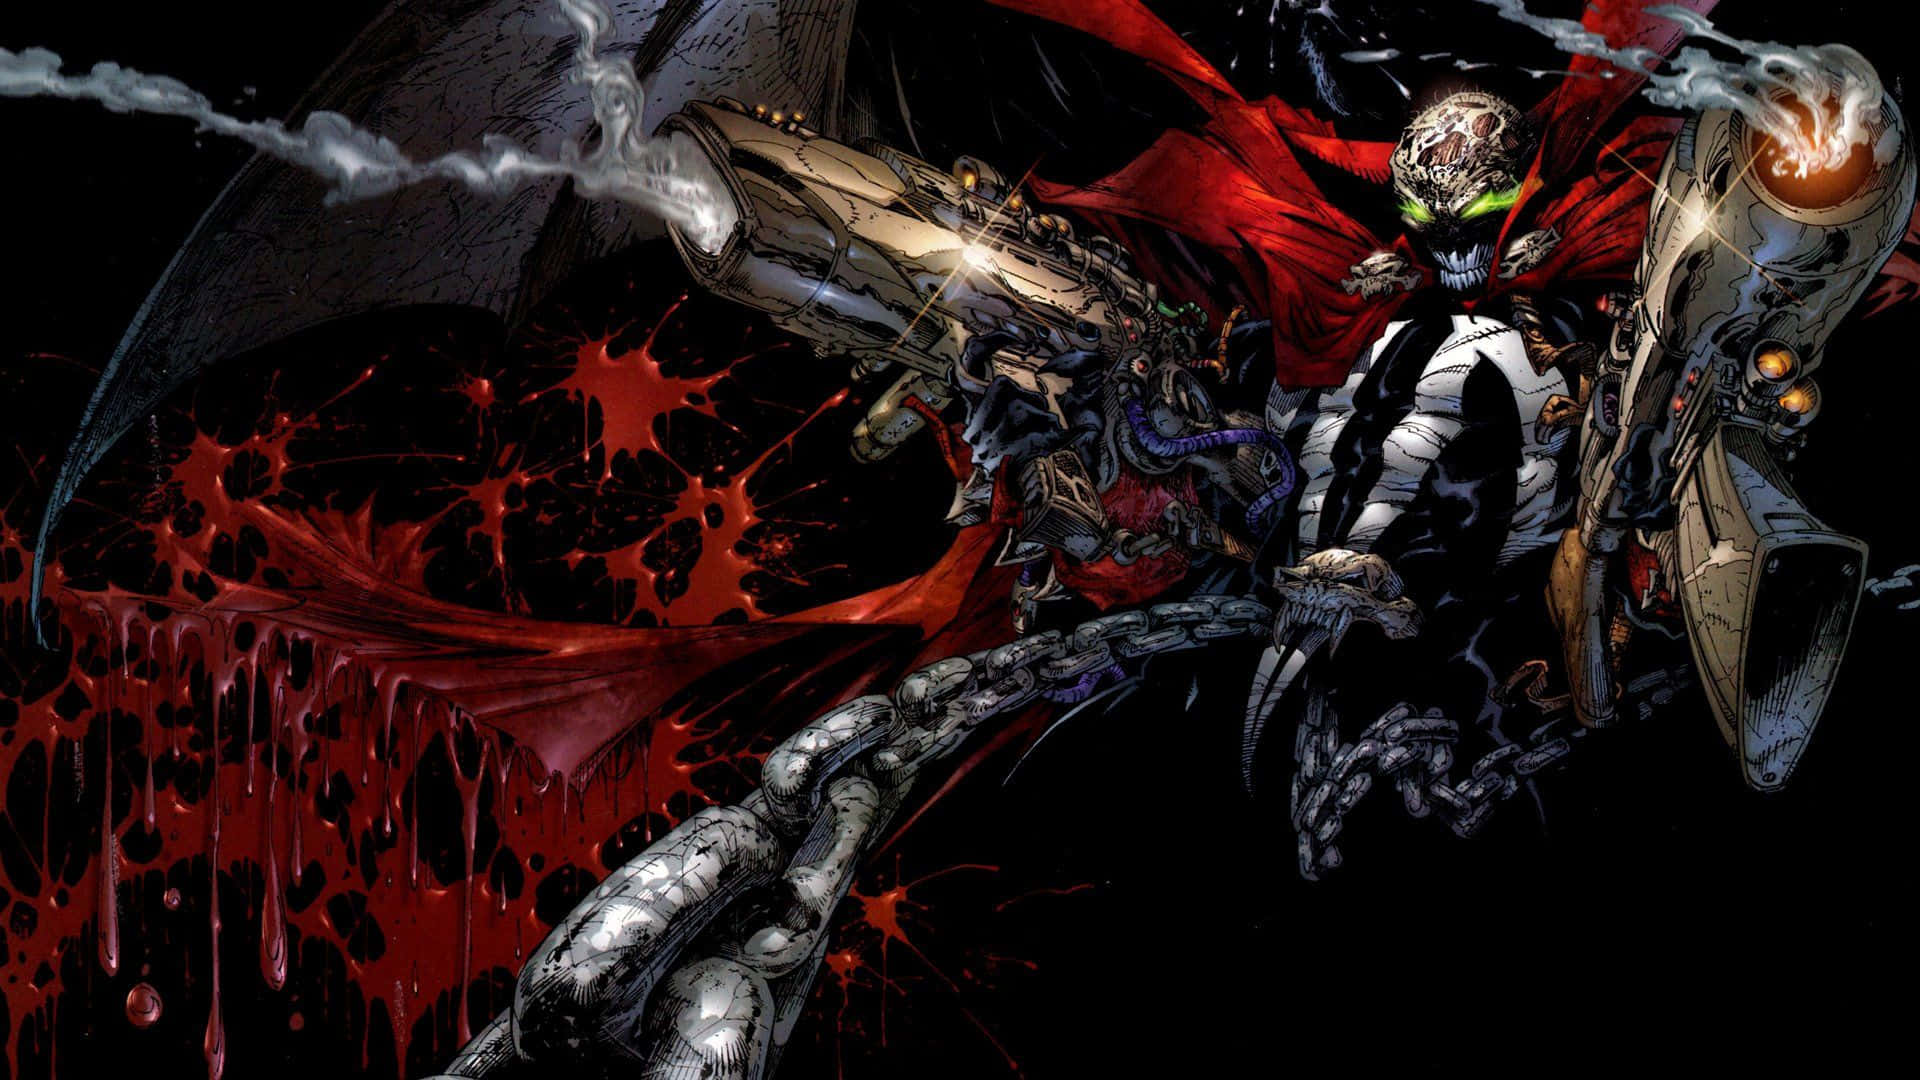 Witness the power of Spawn! Wallpaper